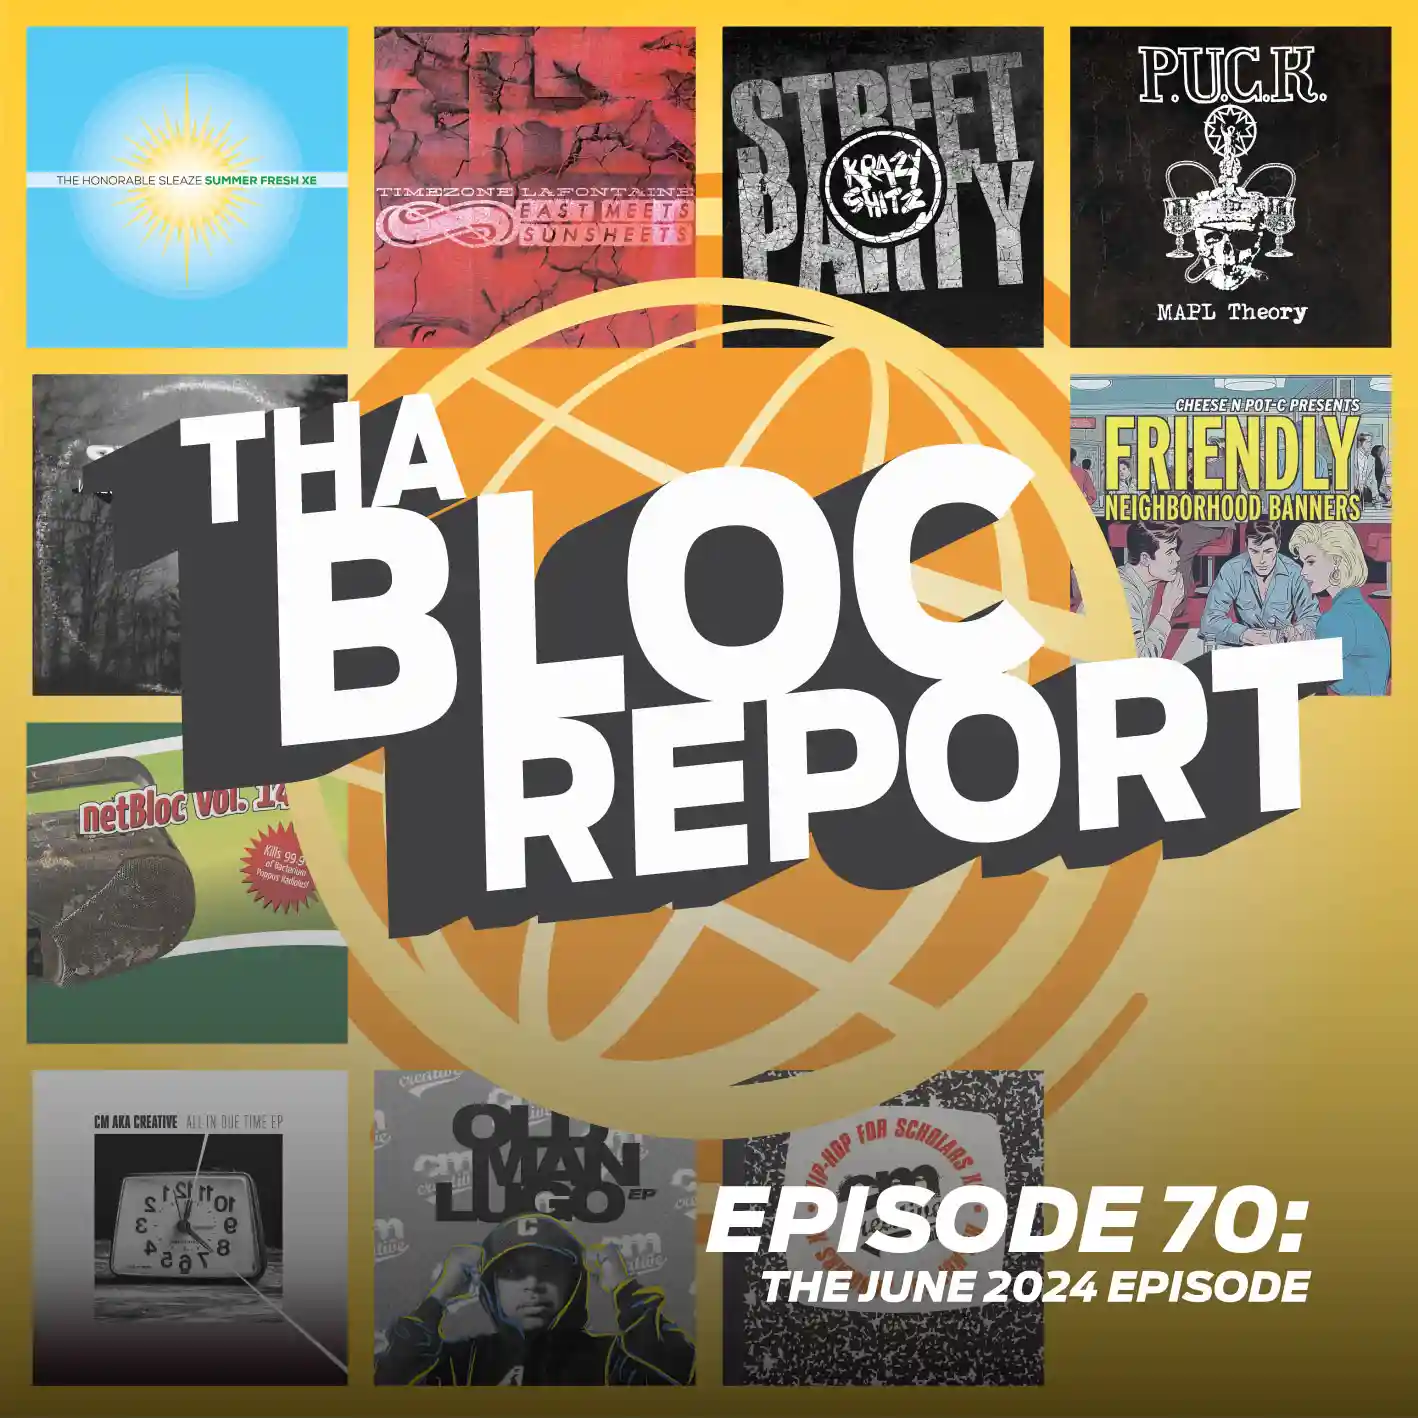 Cover image for “Tha Bloc Report Episode 70: The June 2024 Episode” hosted by Donnie Ozone